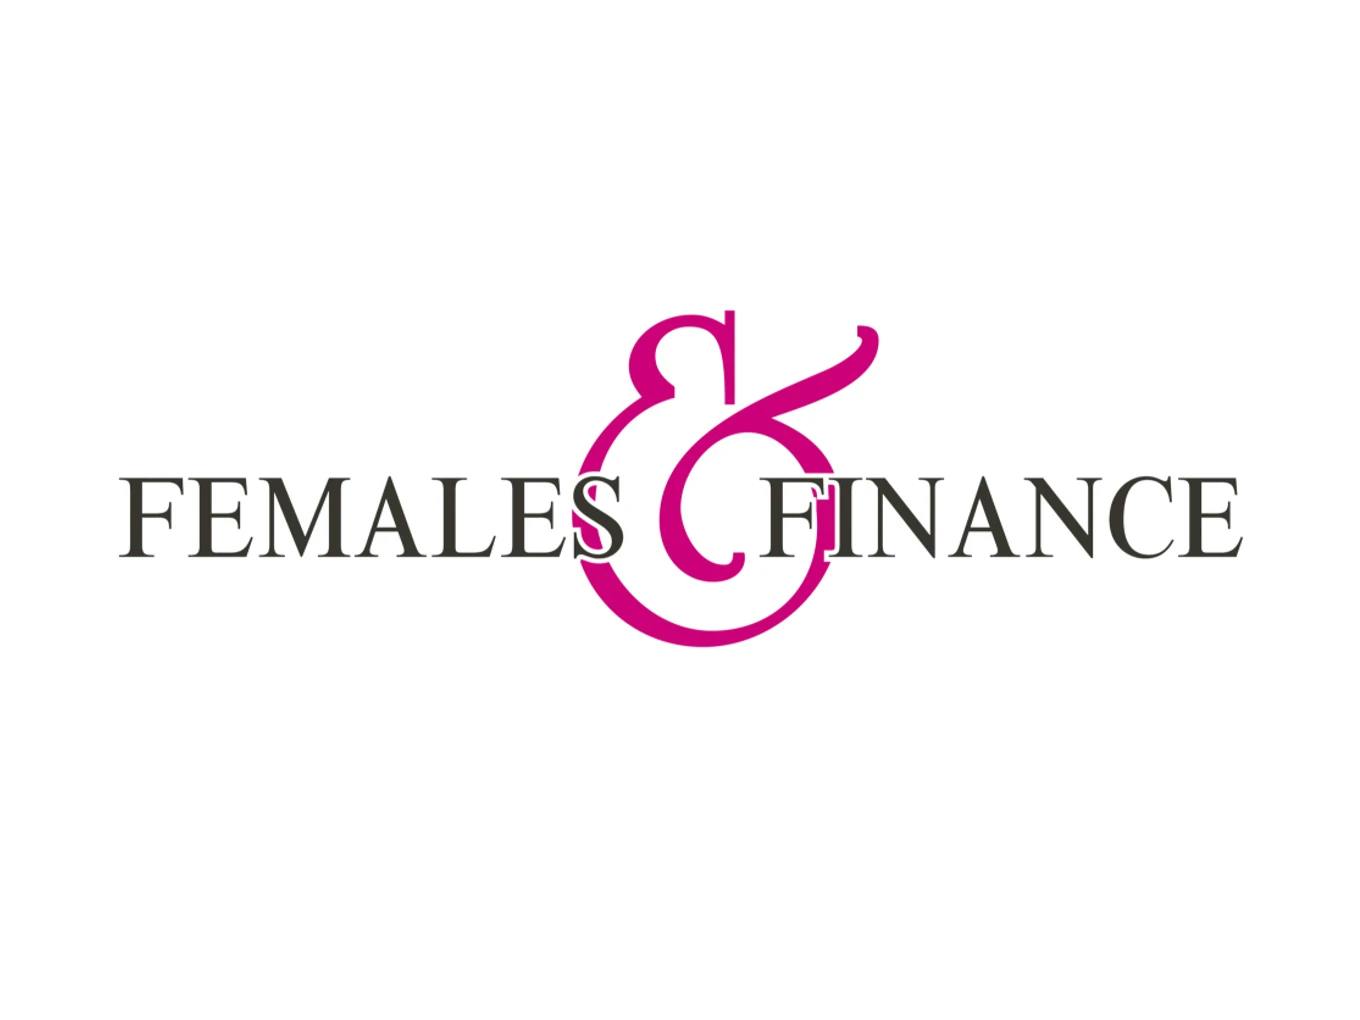 Females and Finance Scholarship Fund